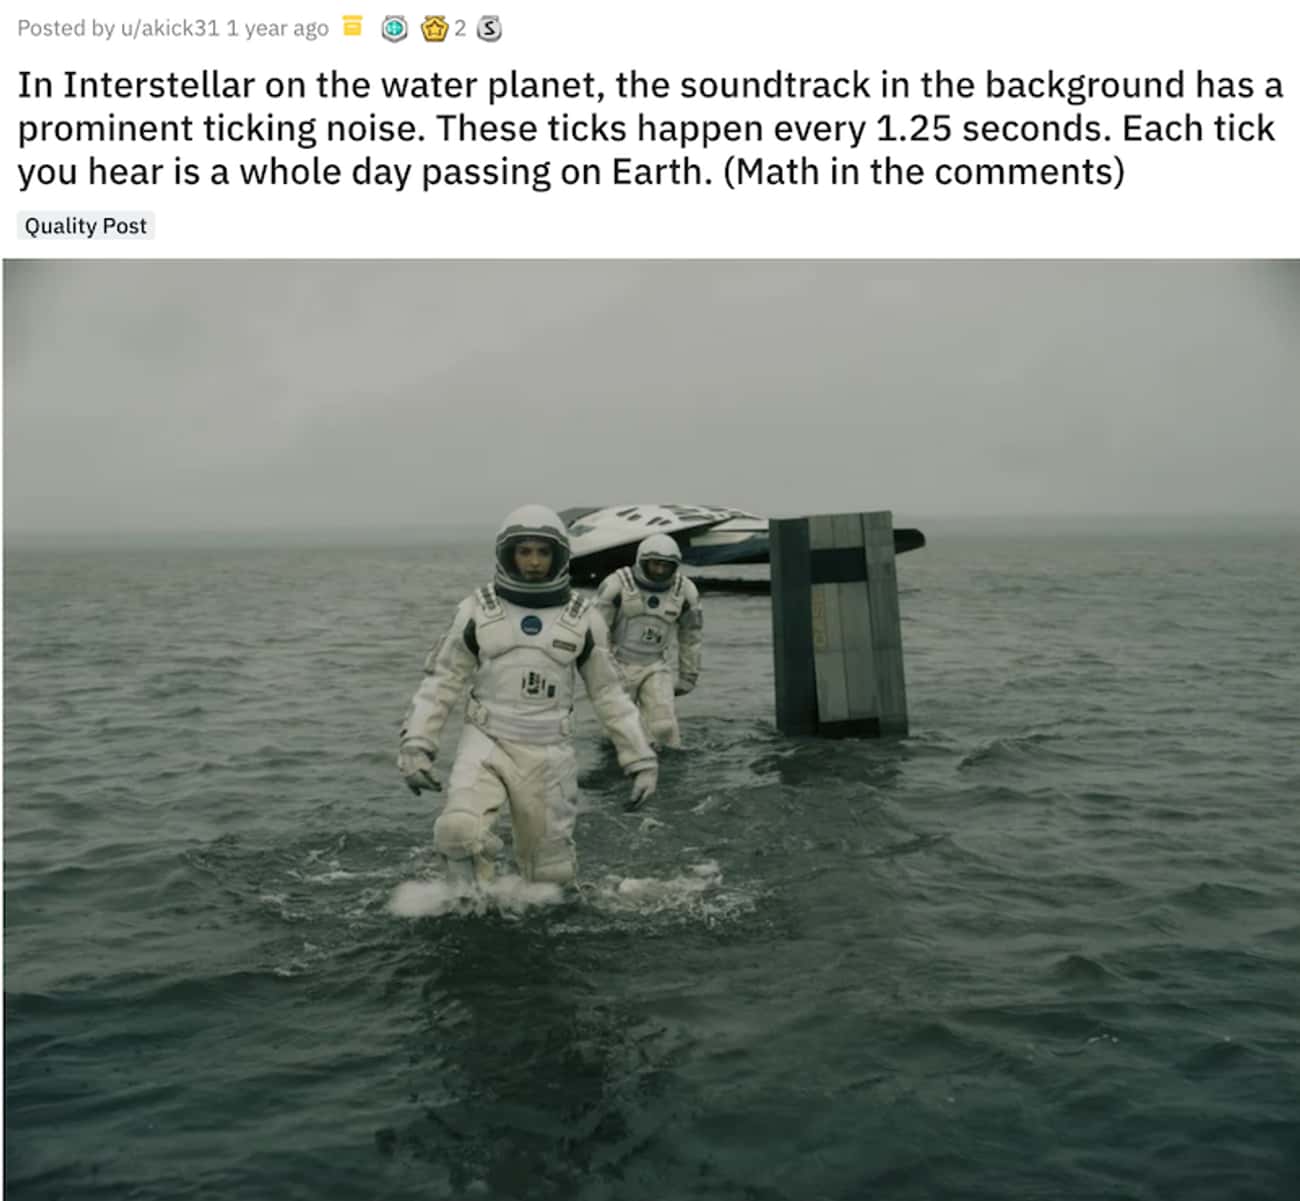 On The Water Planet In Interstellar, Each Tick Equals One Year Passing